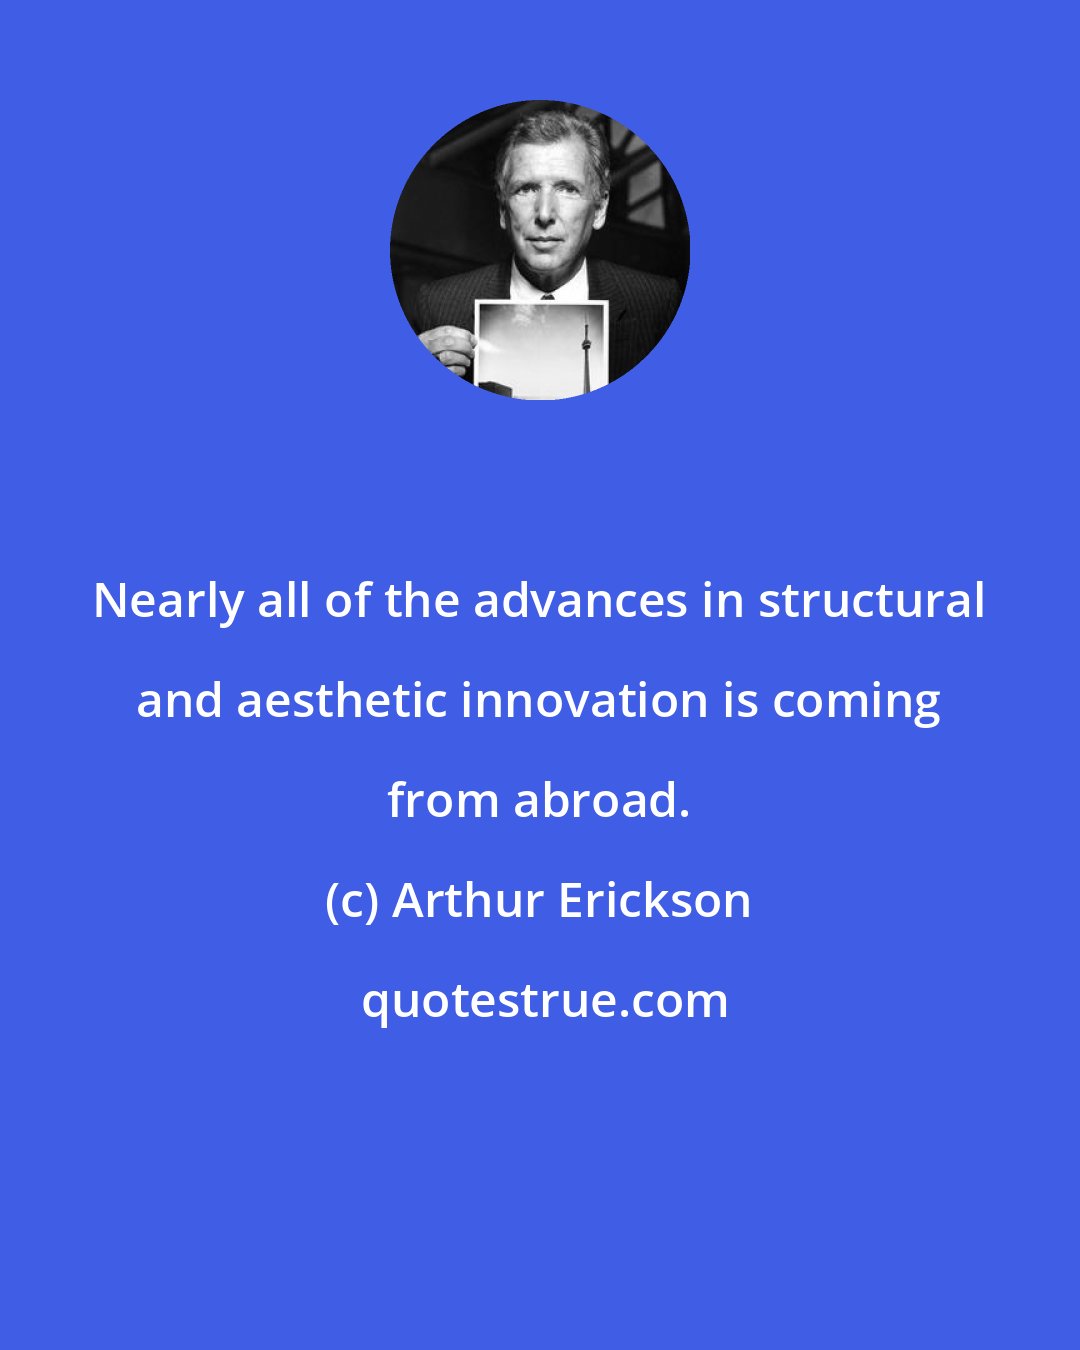 Arthur Erickson: Nearly all of the advances in structural and aesthetic innovation is coming from abroad.